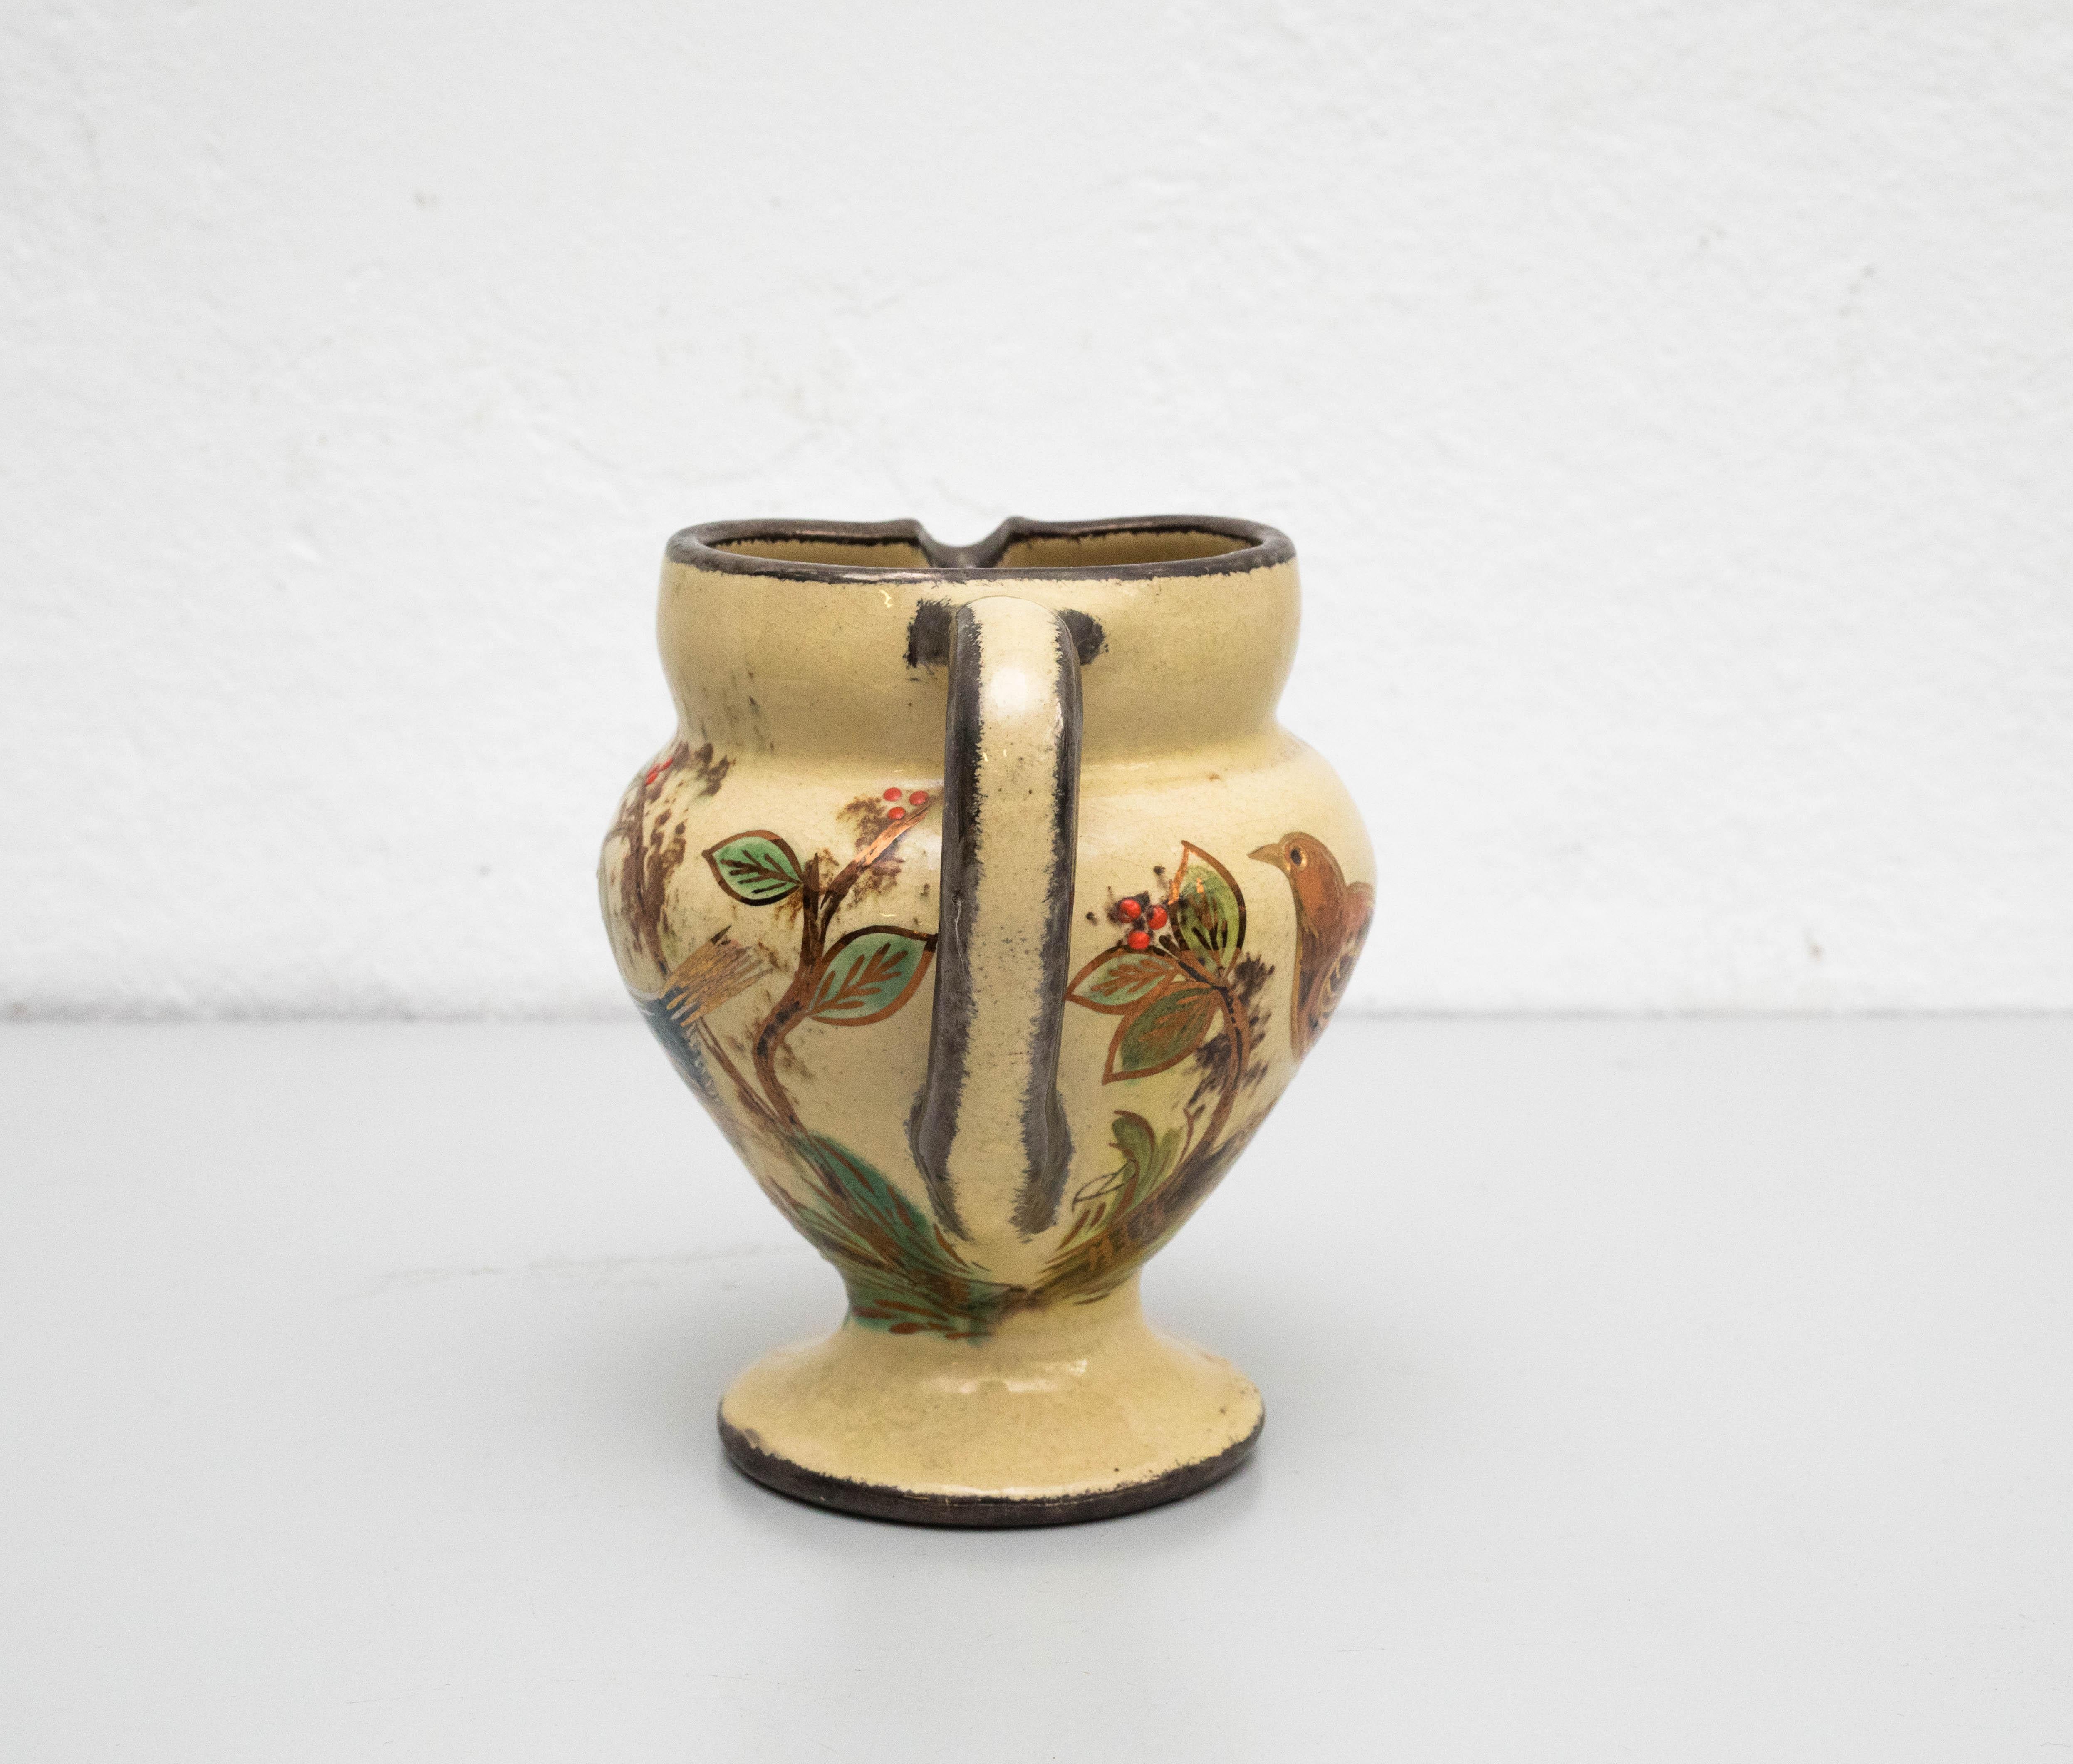 Set of Ceramic Hand Painted Vases by Catalan Artist Diaz Costa, circa 1960 For Sale 12